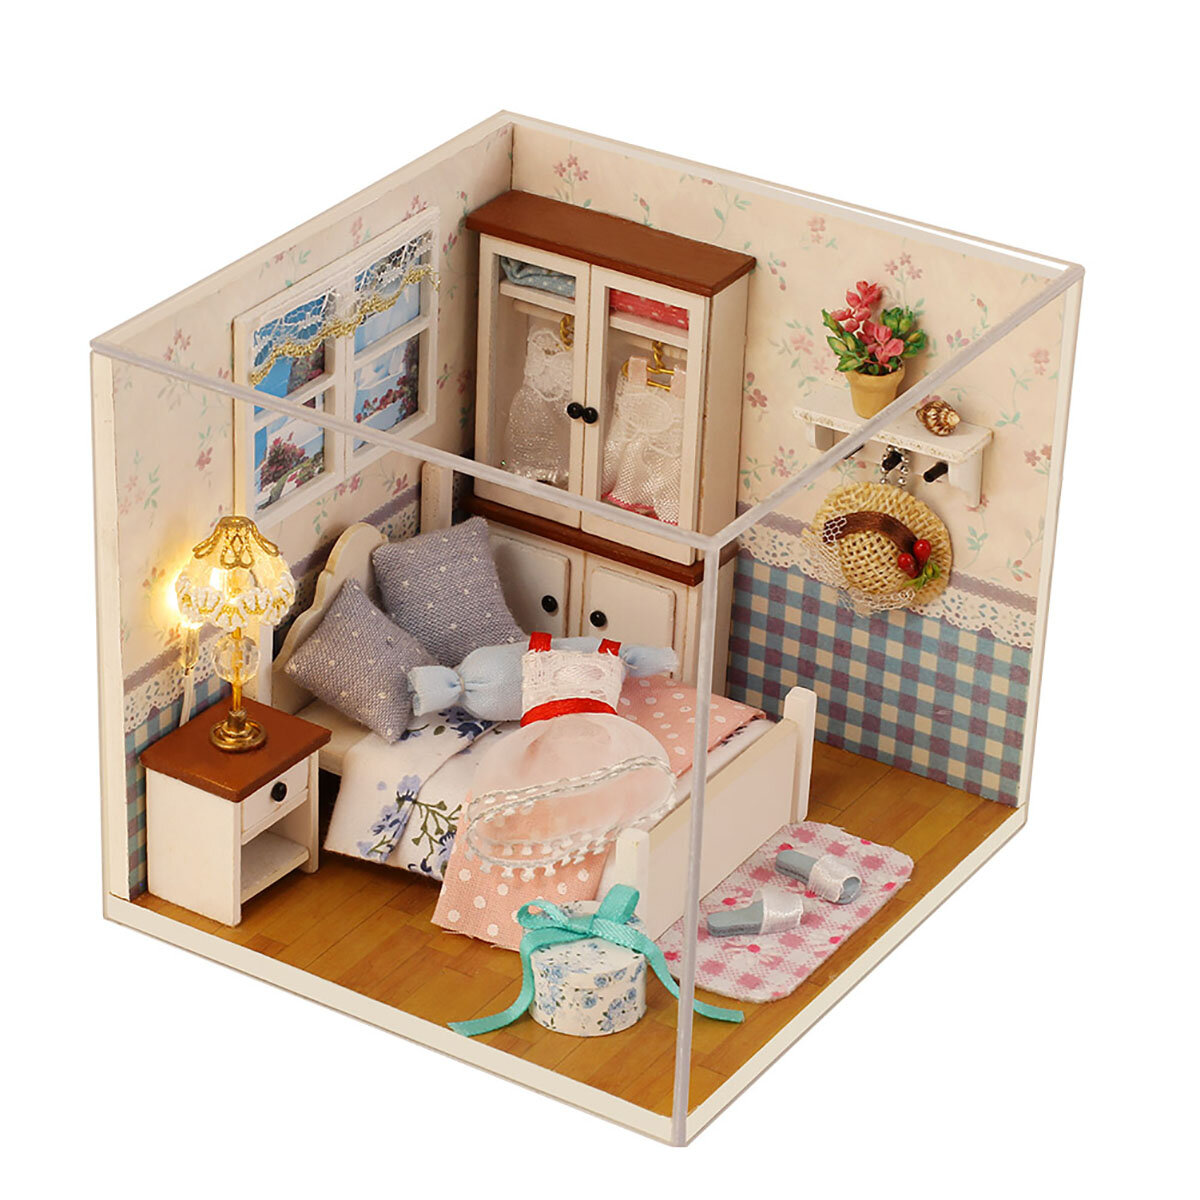 Handmade DIY Dollhouse With Tool Set 3D Scale Miniature LED Lights Kids Room For Children Gift Home 